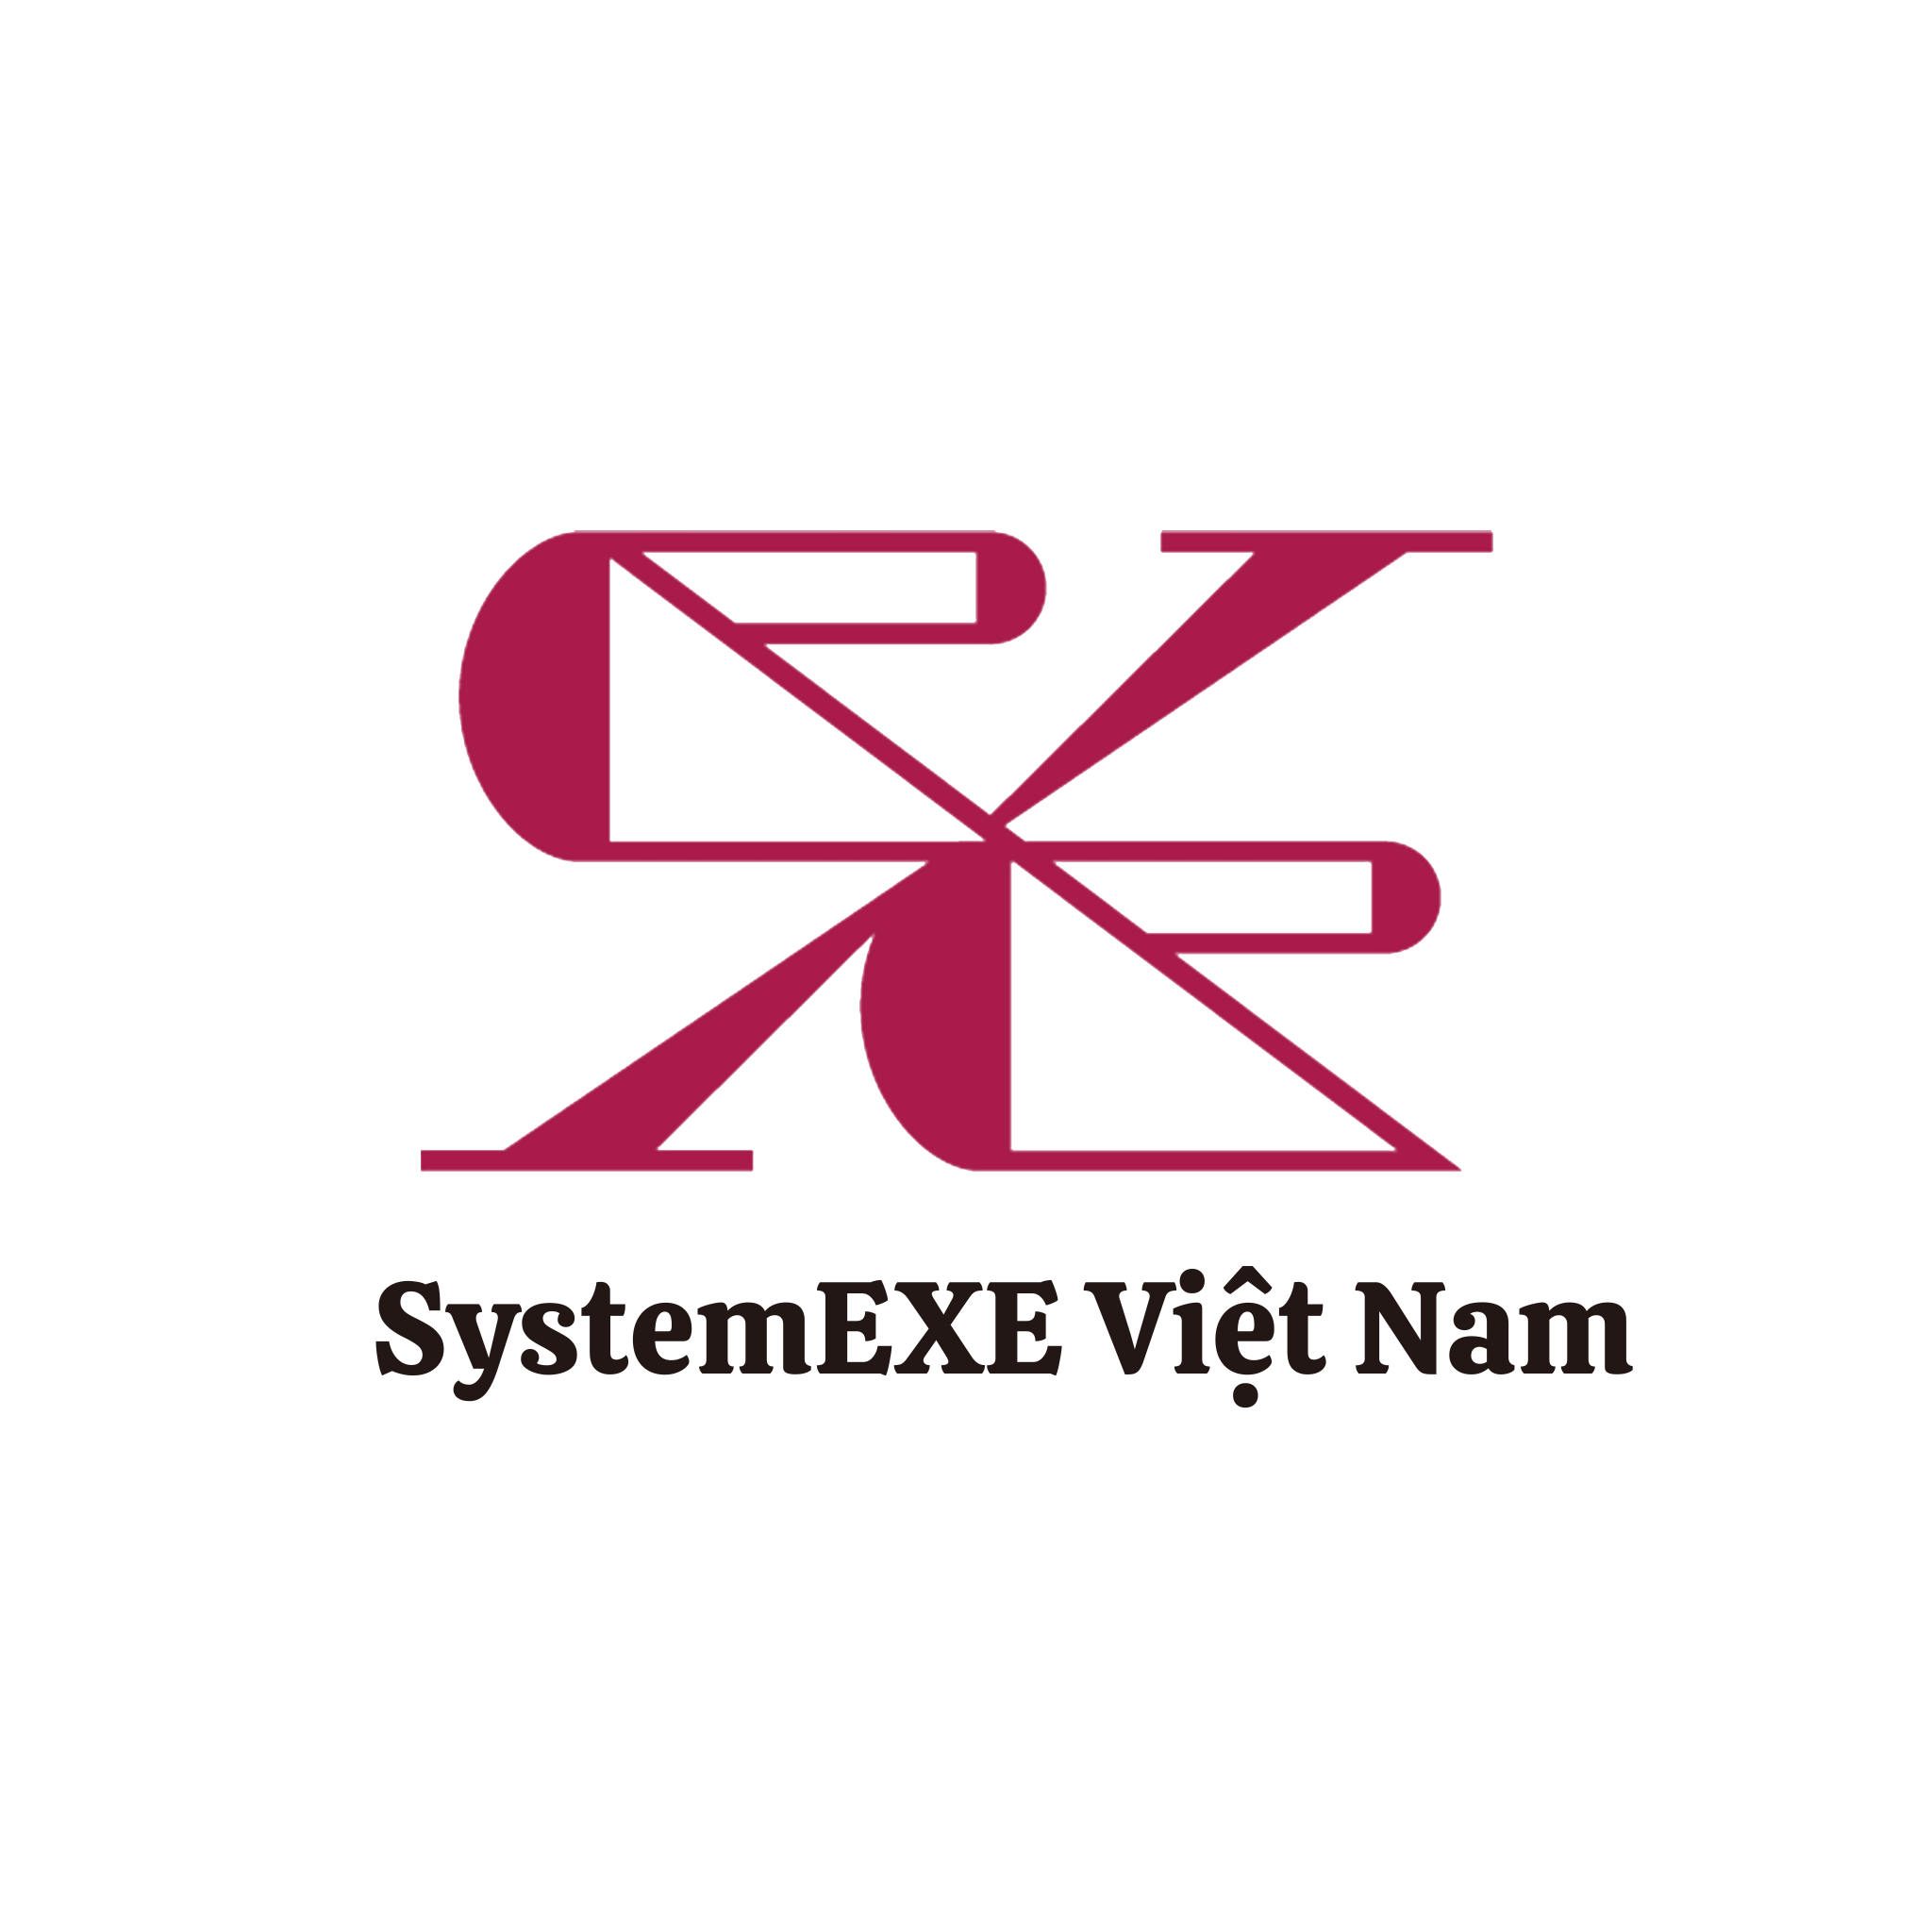 SystemEXE